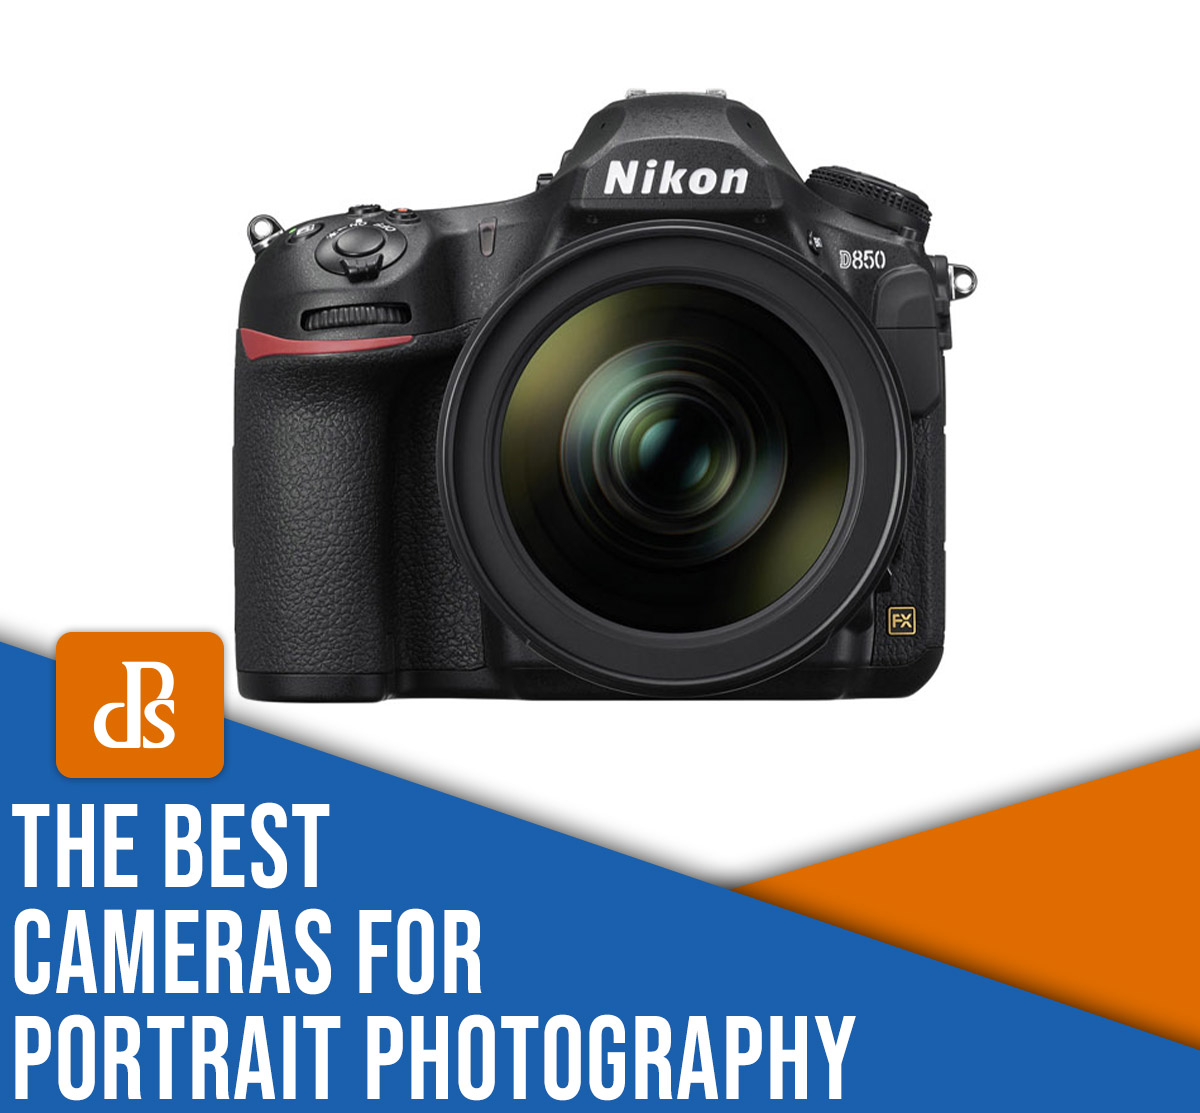 The best cameras for portrait photography